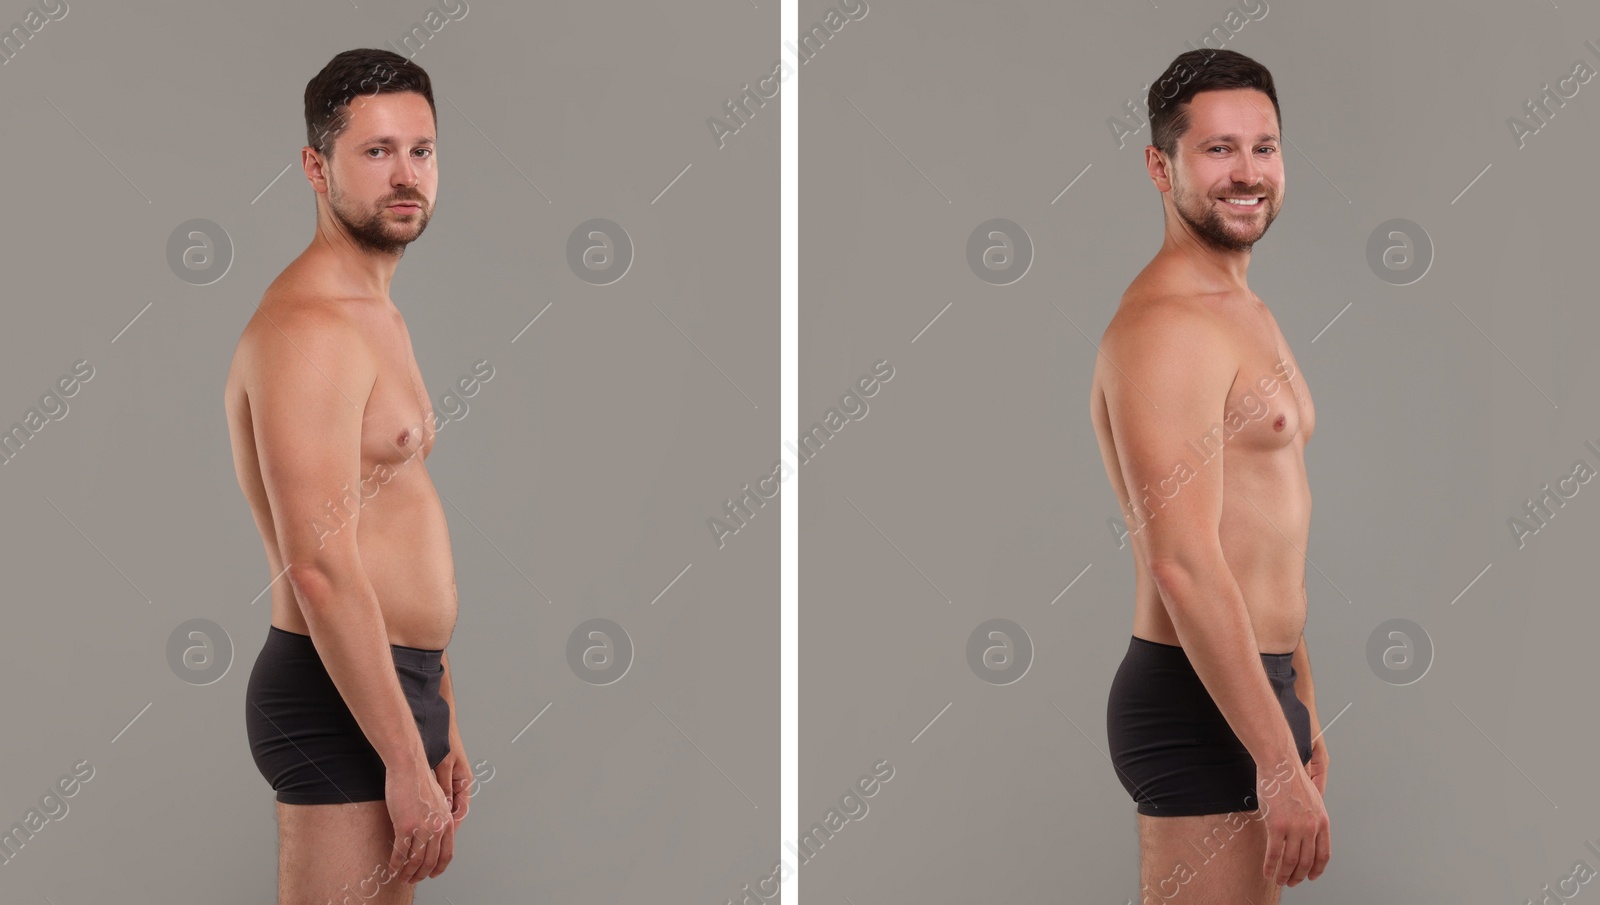 Image of Collage with portraits of man before and after weight loss on grey background